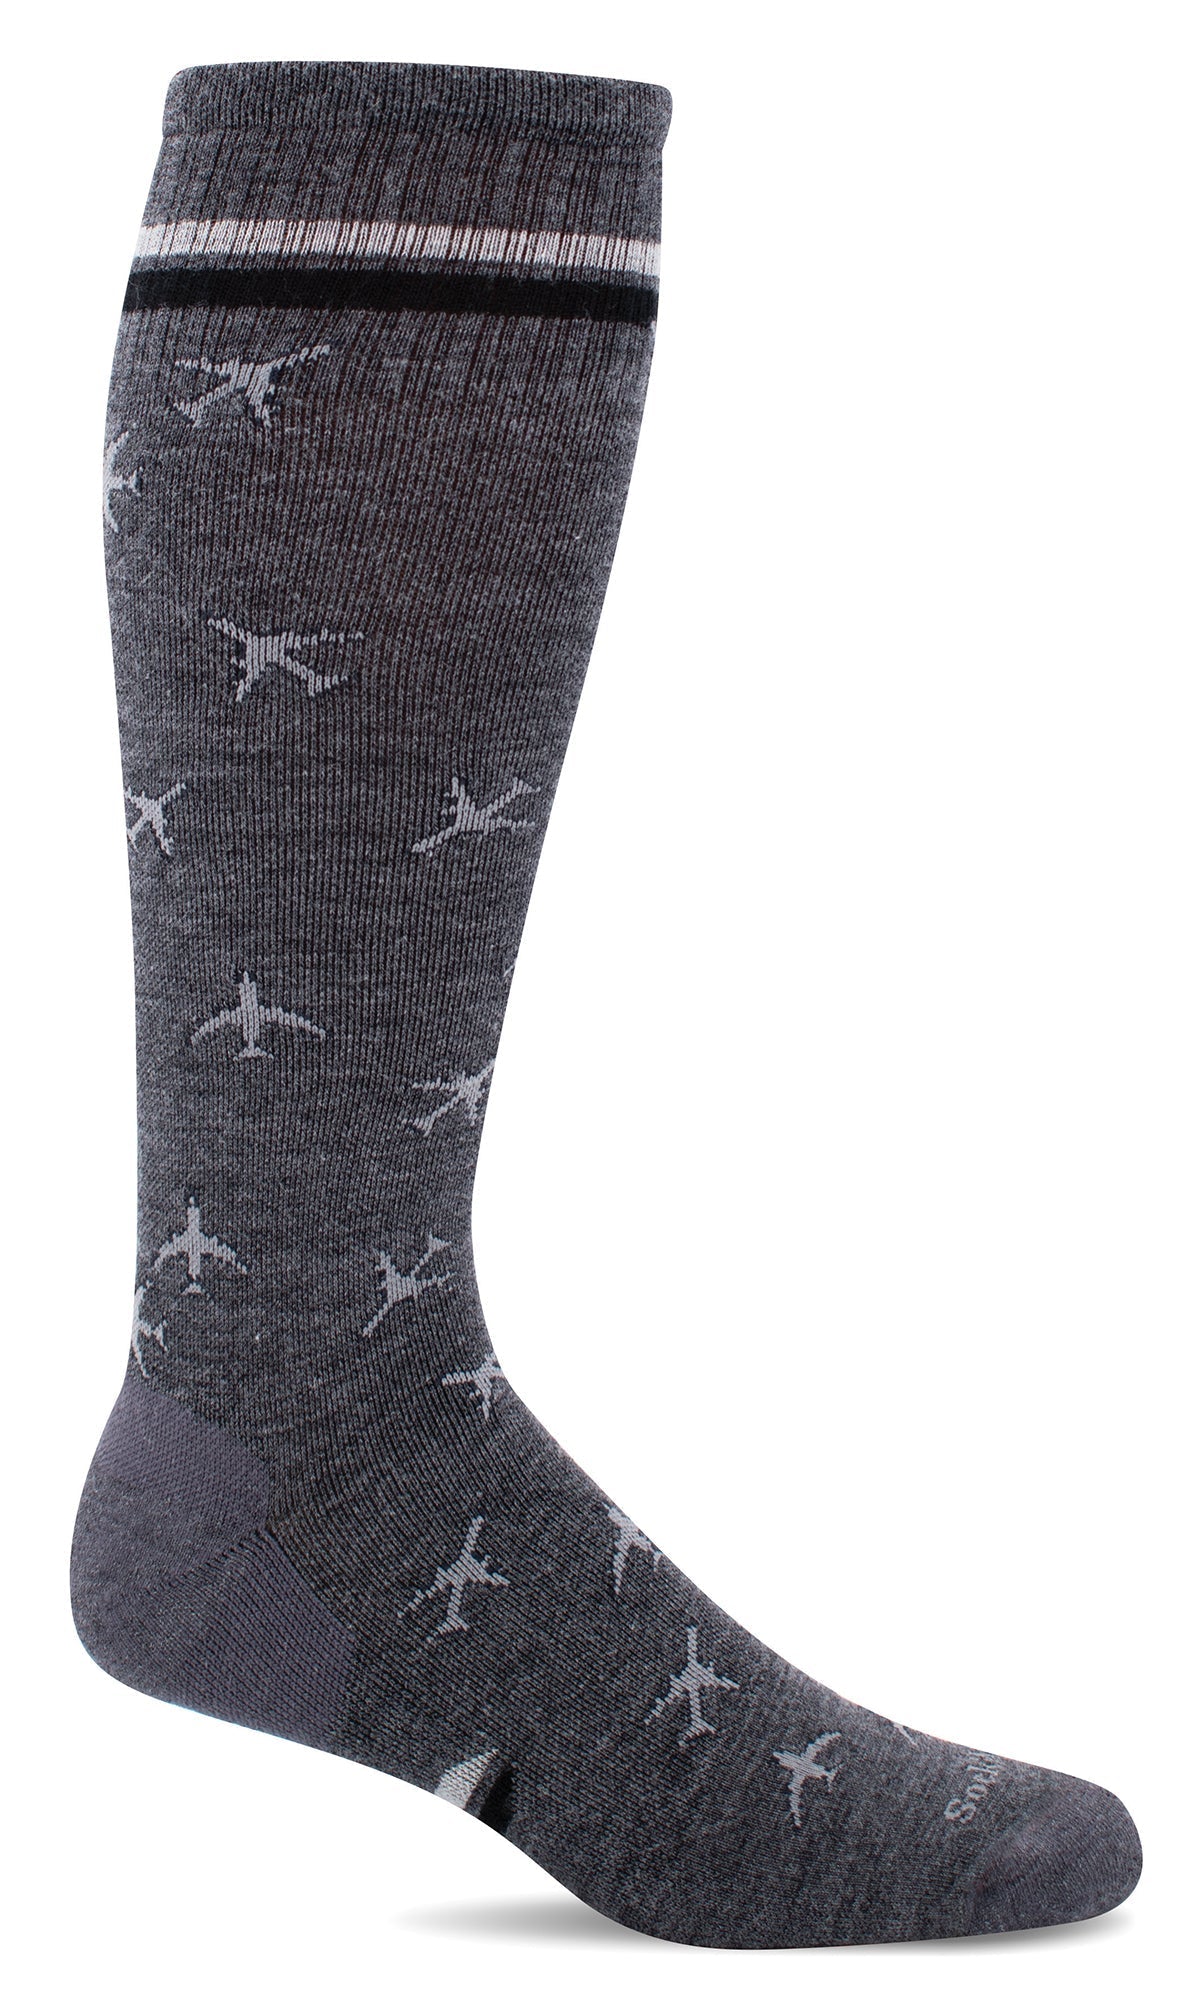 Men's In Flight | Moderate Graduated Compression Socks - Merino Wool Lifestyle Compression - Sockwell